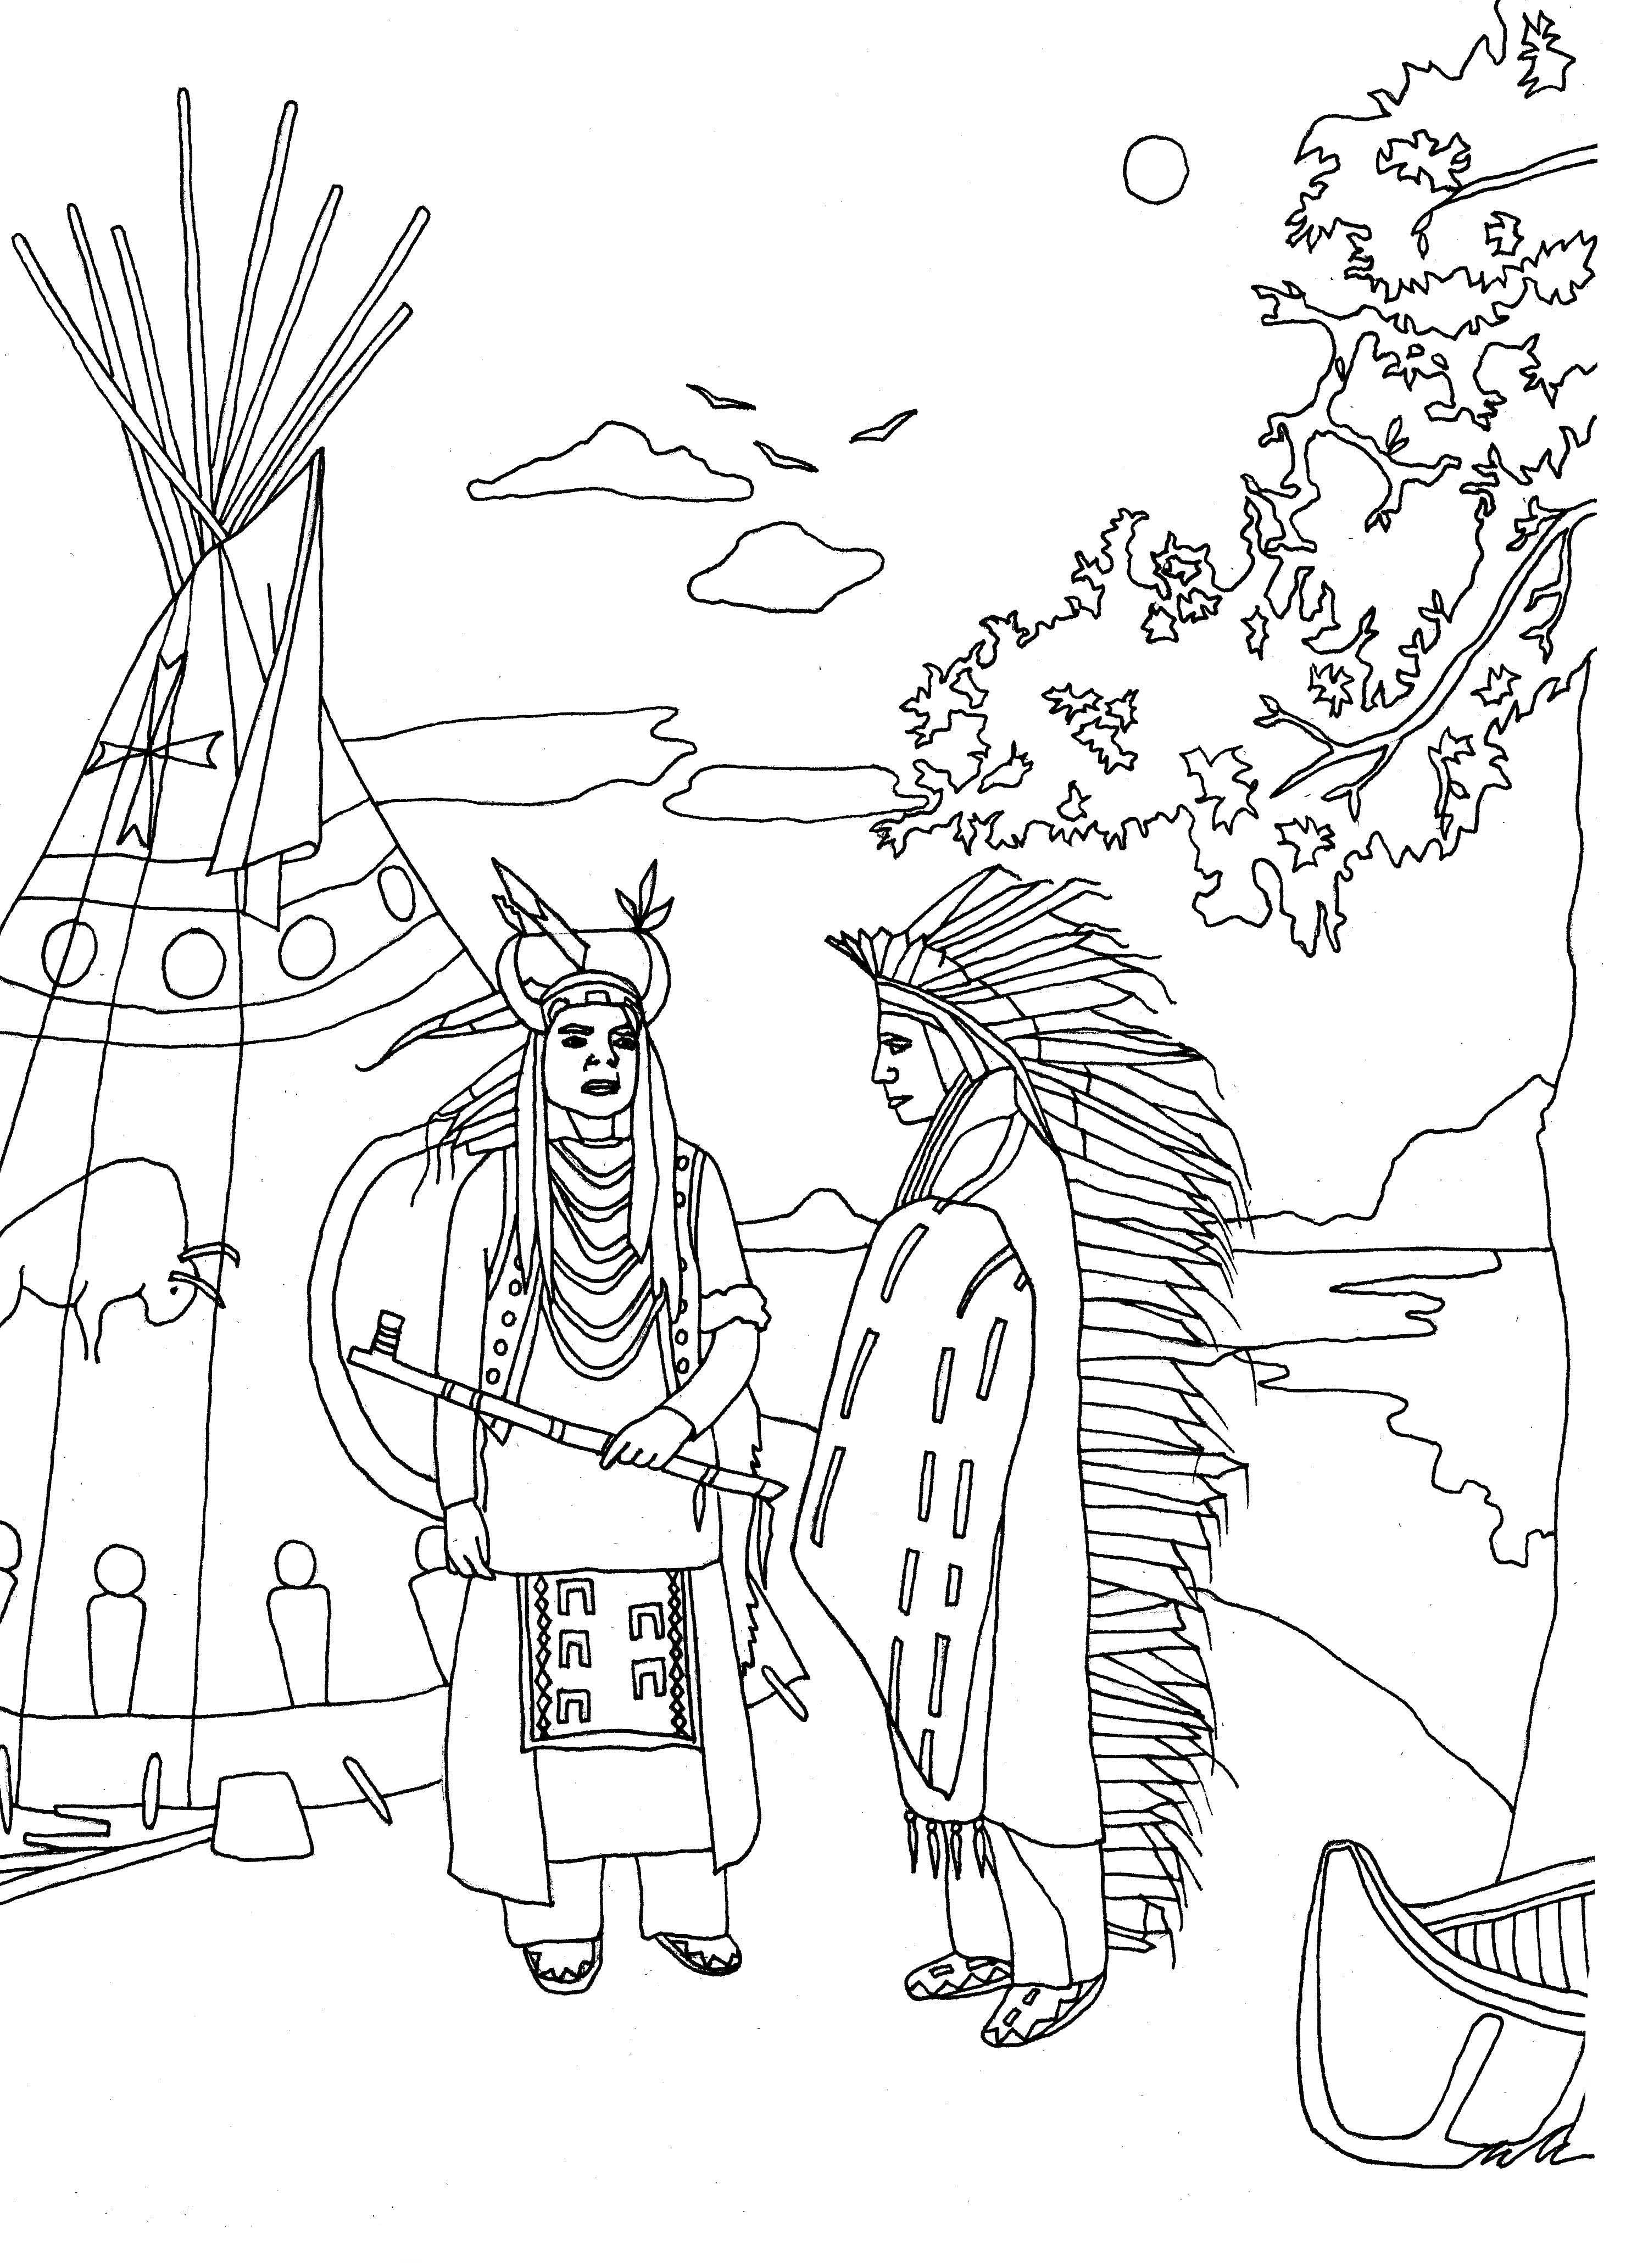 Indian Coloring Pages to download and print for free